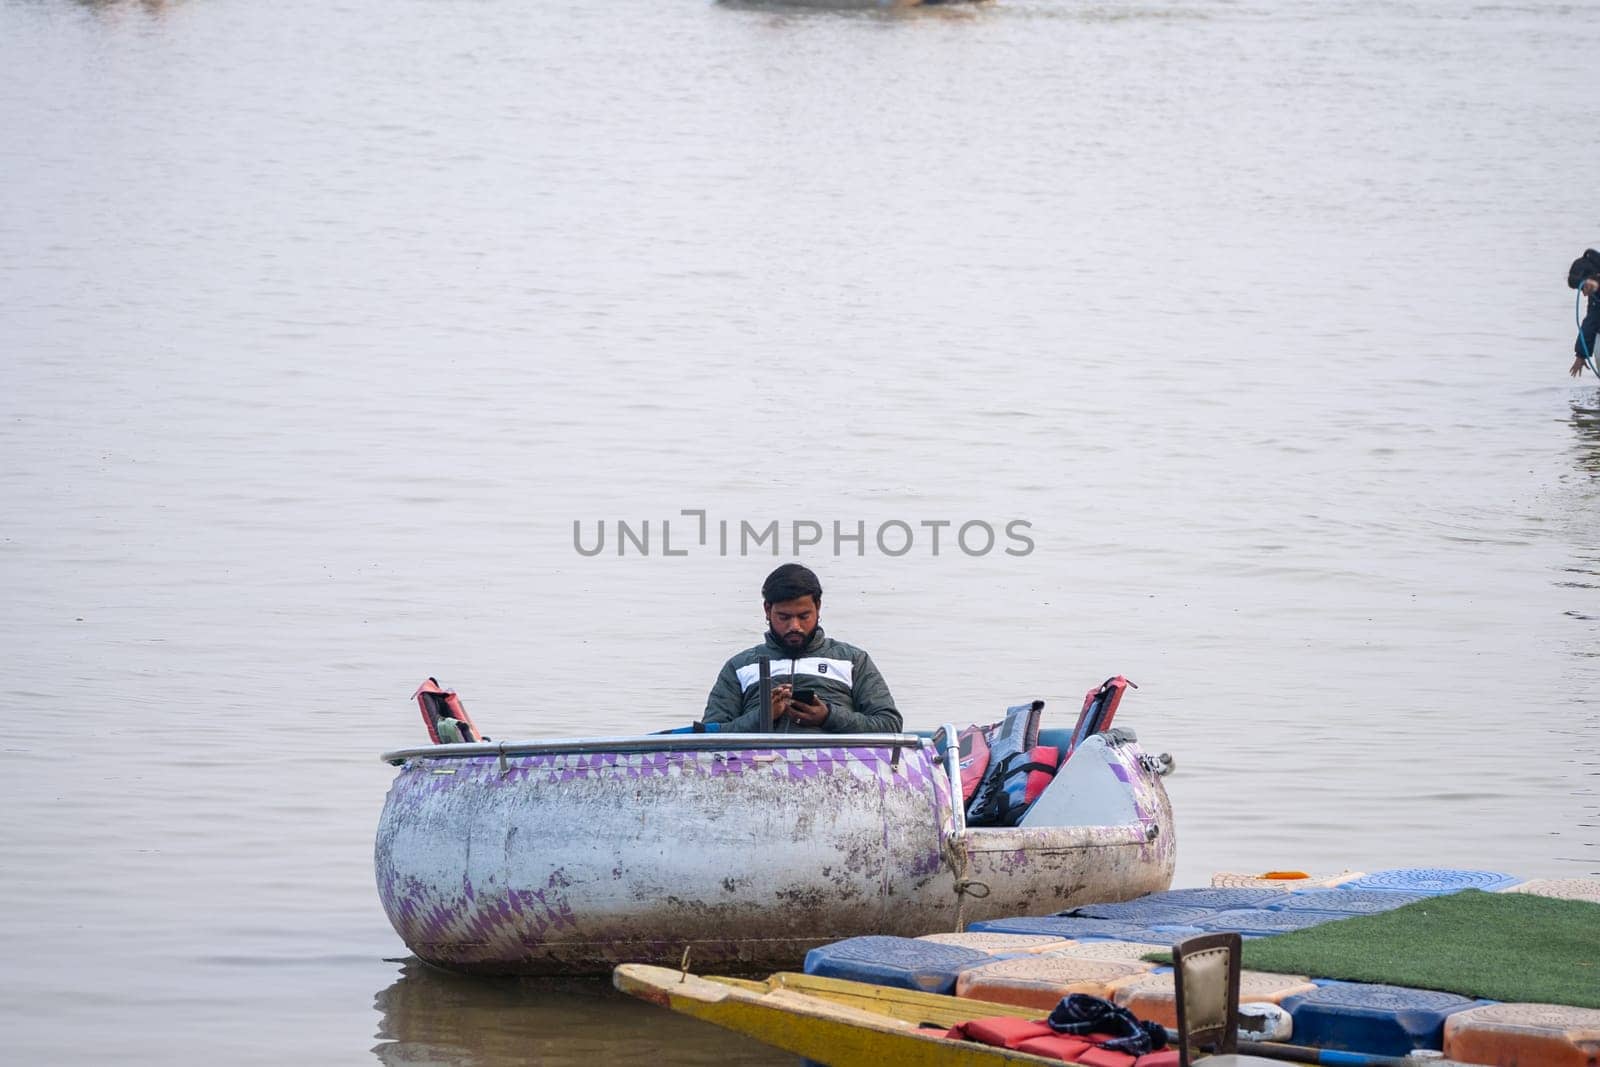 Chandigarh, Punjab, India -circa 2023: people enjoying a pedal boat decorated beautifully on the landmark sukhna lake in chandigarh with more boats in the distance showing this popular tourist spot